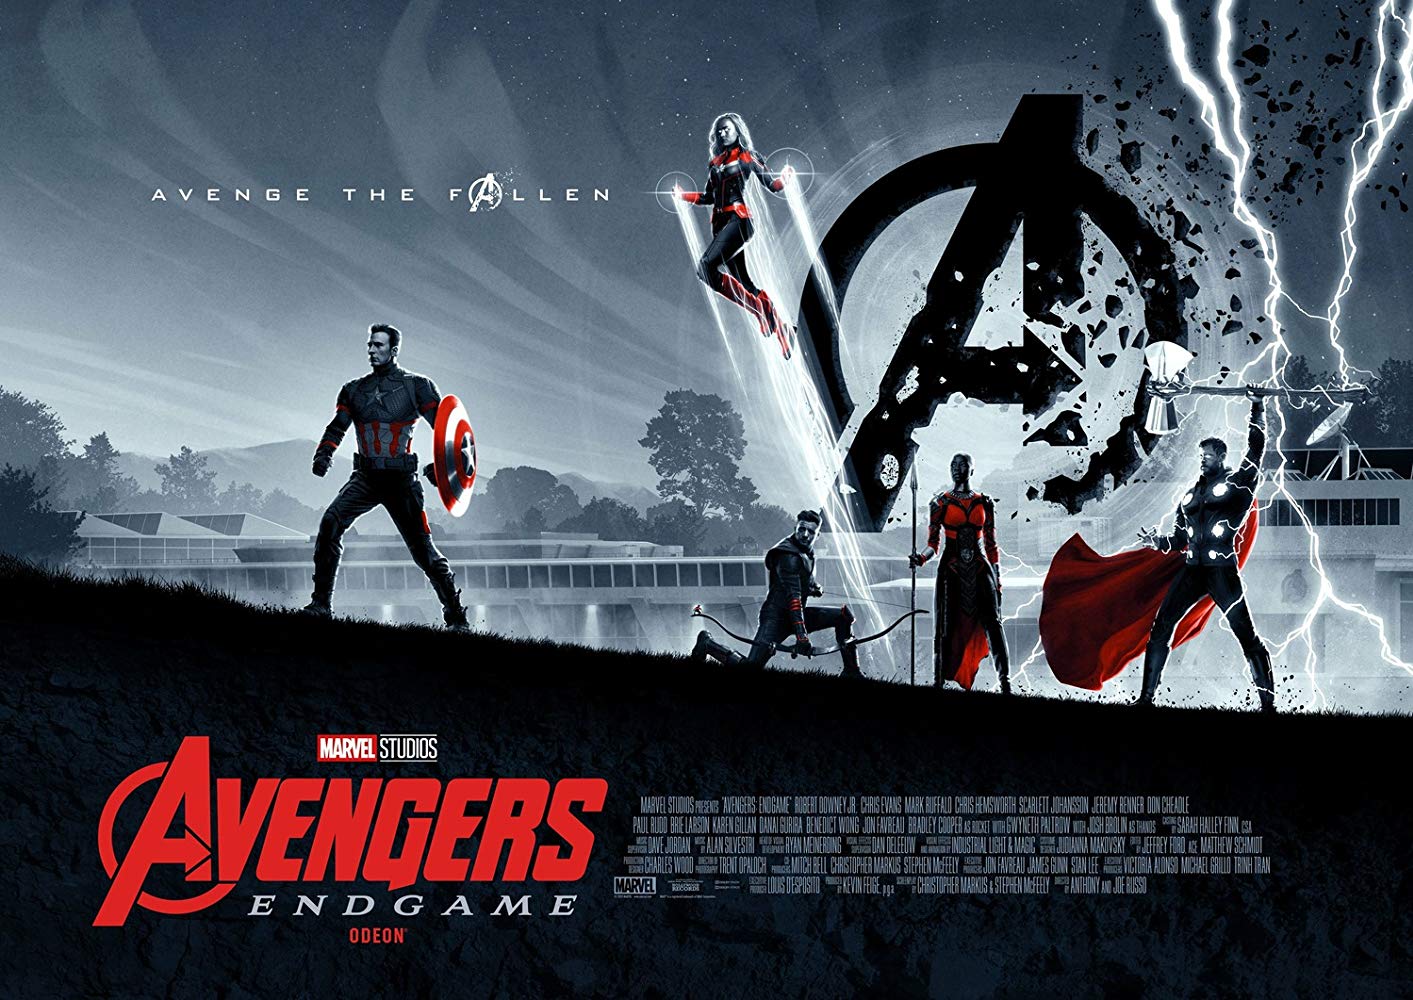 endgame - BREAKING: Avengers Endgame To Be RE-Released With Additional New Footage